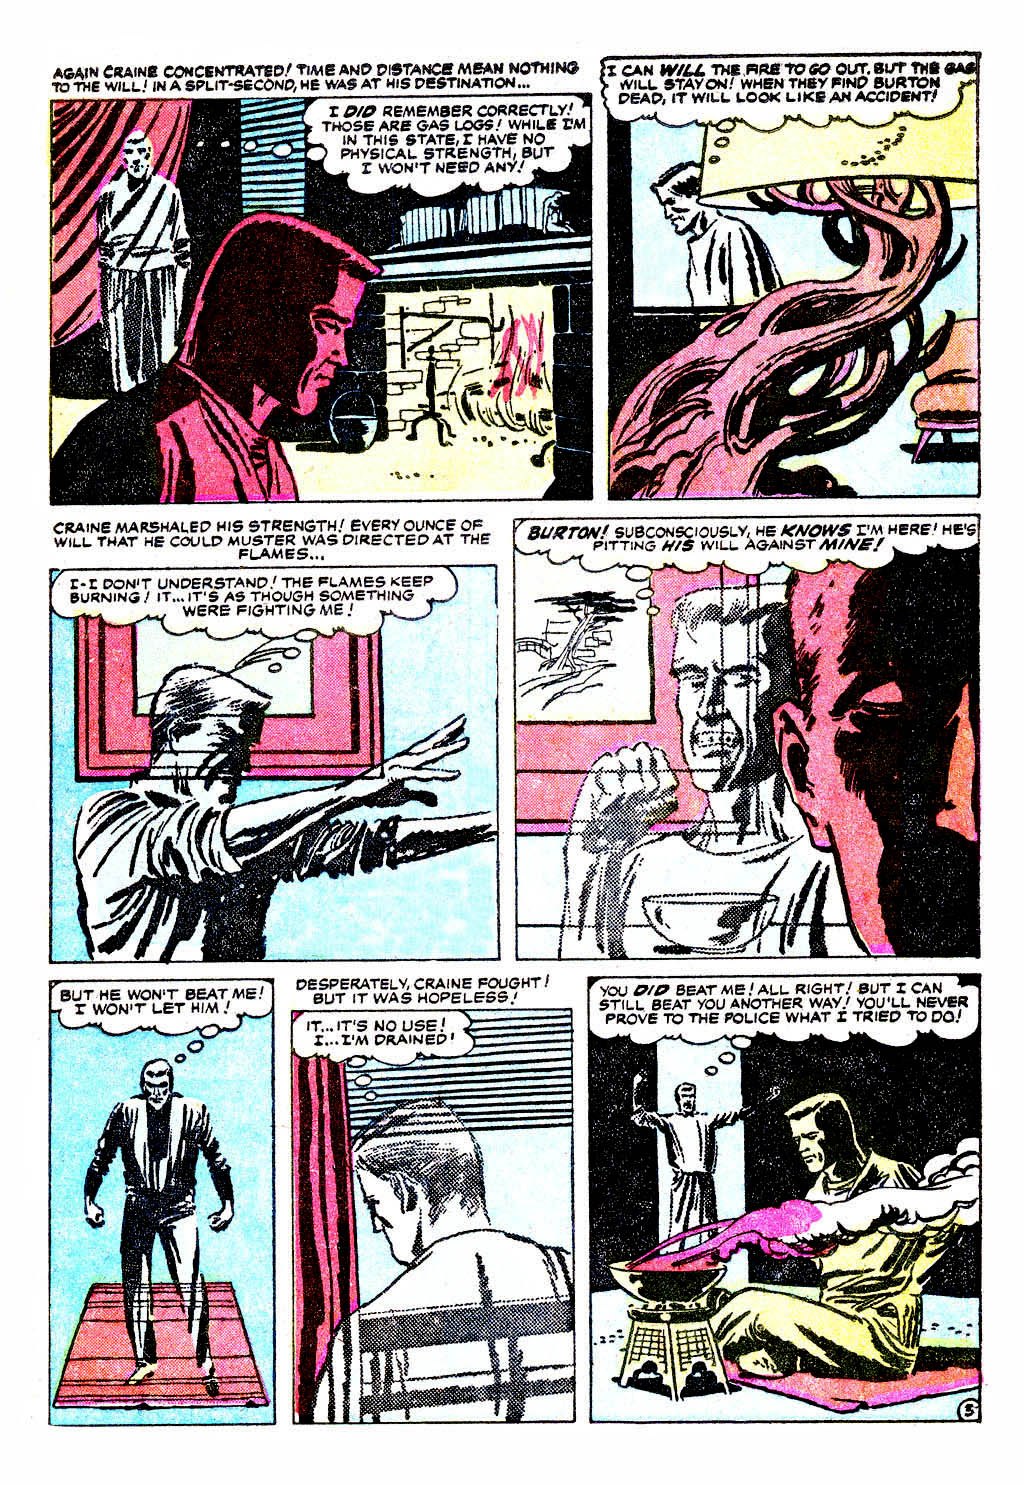 Journey Into Mystery (1952) 47 Page 4